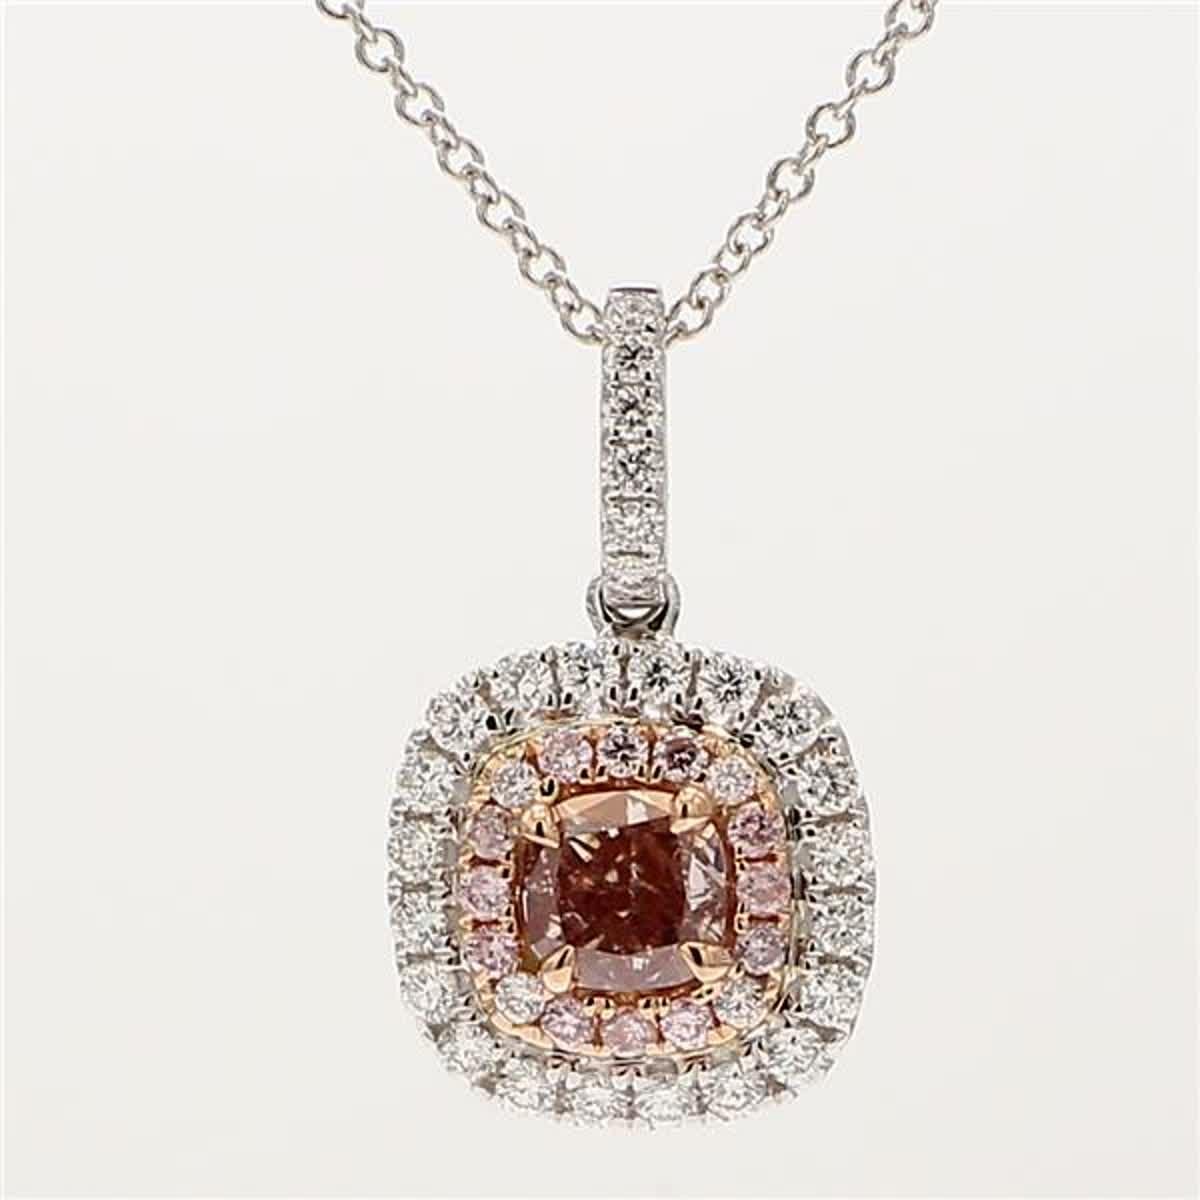 RareGemWorld's intriguing GIA certified diamond pendant. Mounted in a beautiful 18K Rose and White Gold setting with a natural cushion cut pink diamond. The pink diamond is surrounded by round natural pink diamond melee and round natural white